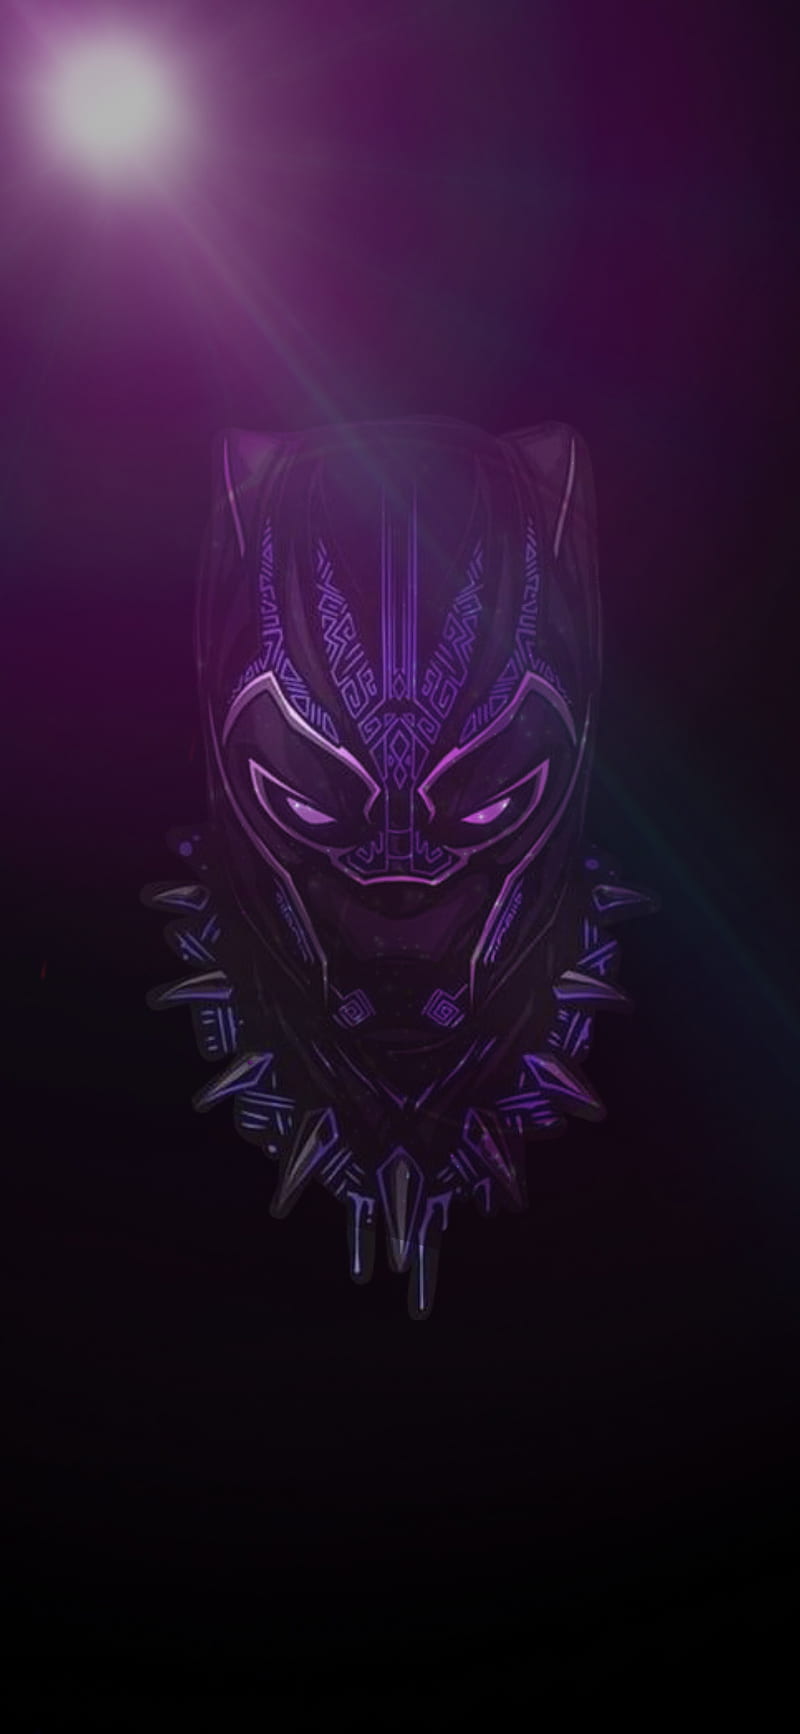 Free download Black Panther Wallpapers Top 65 Best Black Panther Backgrounds  [1080x2160] for your Desktop, Mobile & Tablet | Explore 14+ Black Panther  Purple Wallpapers | Black Panther Background, Black Panther Wallpapers, Black  Panther Wallpaper